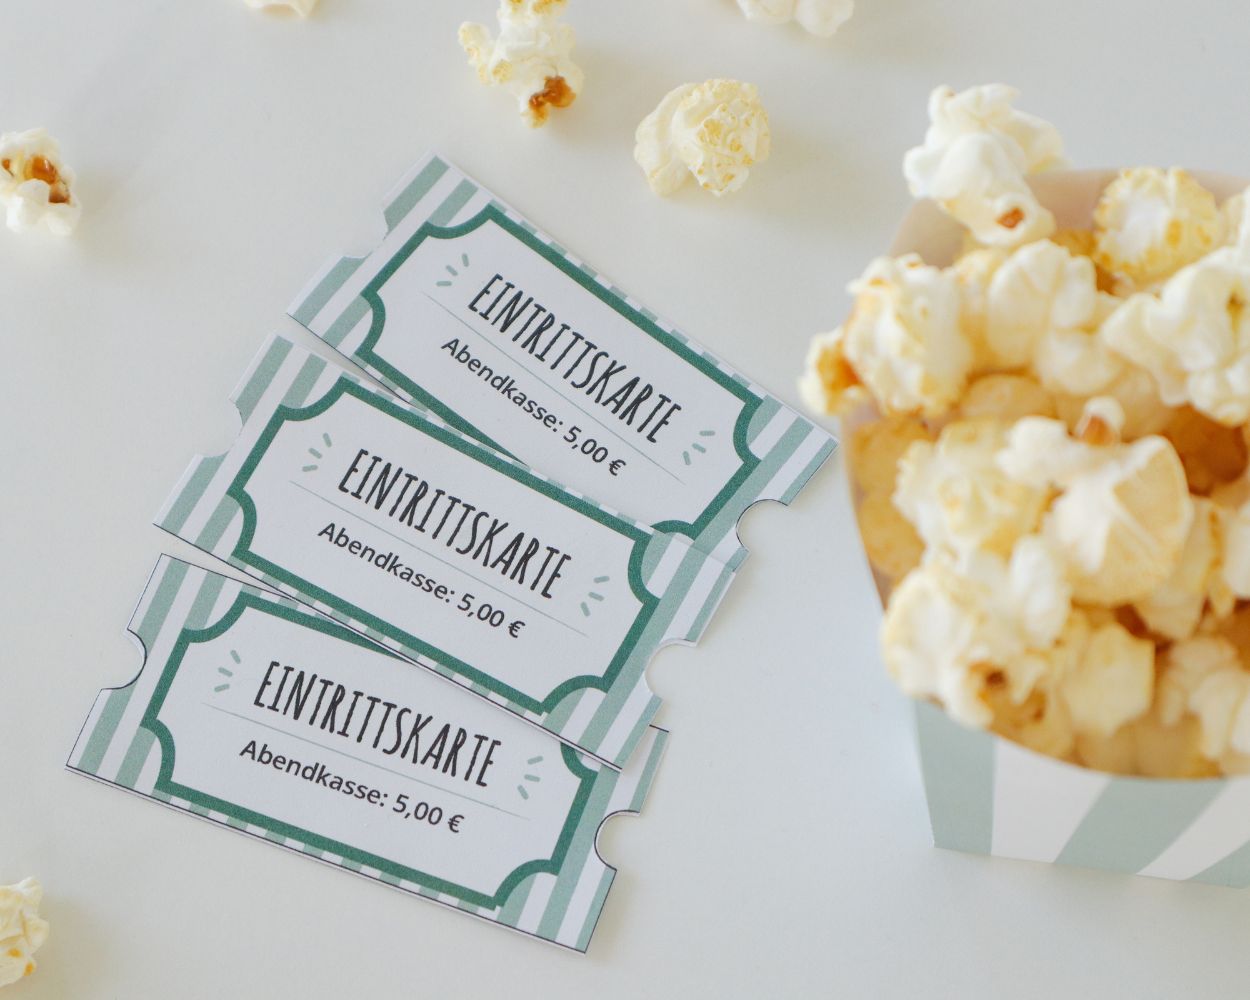 Make your own cinema tickets and popcorn bags - with free download